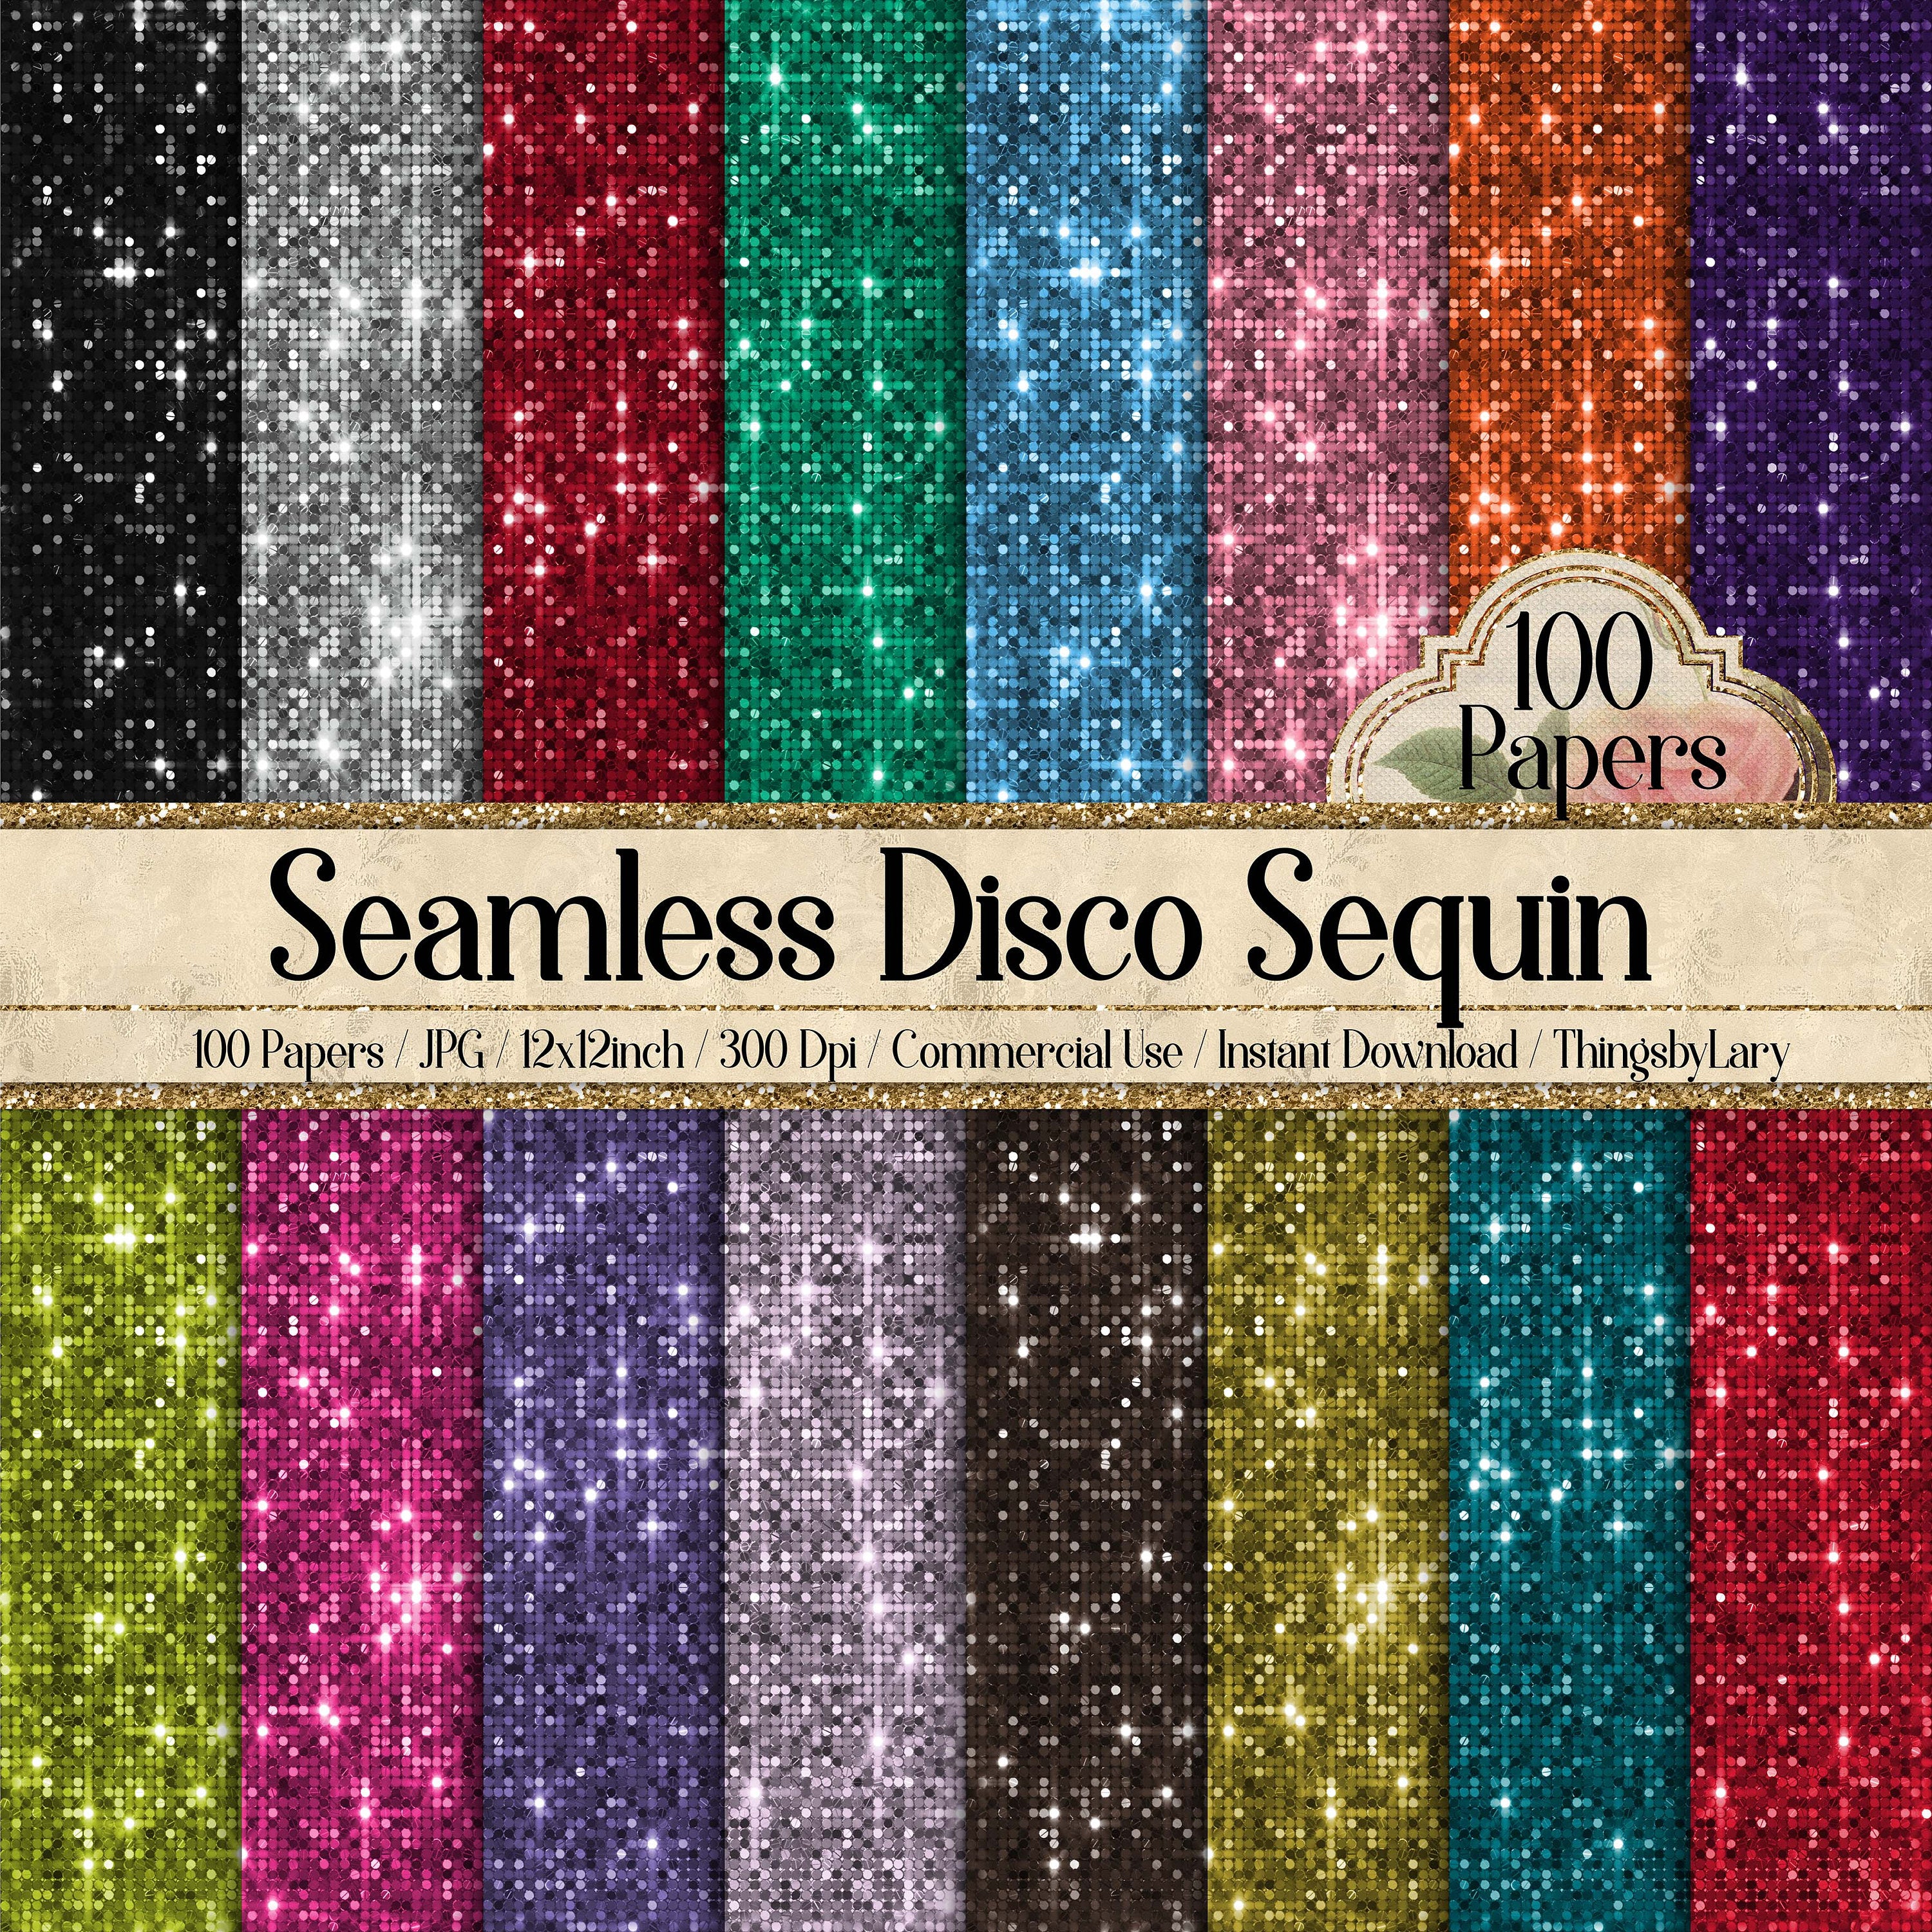 100 Seamless Glowing Bling Bling Disco Sequin Digital Papers 12 inch 300 Dpi Instant Download Commercial Use Digital Sequin Real Sequin Gold